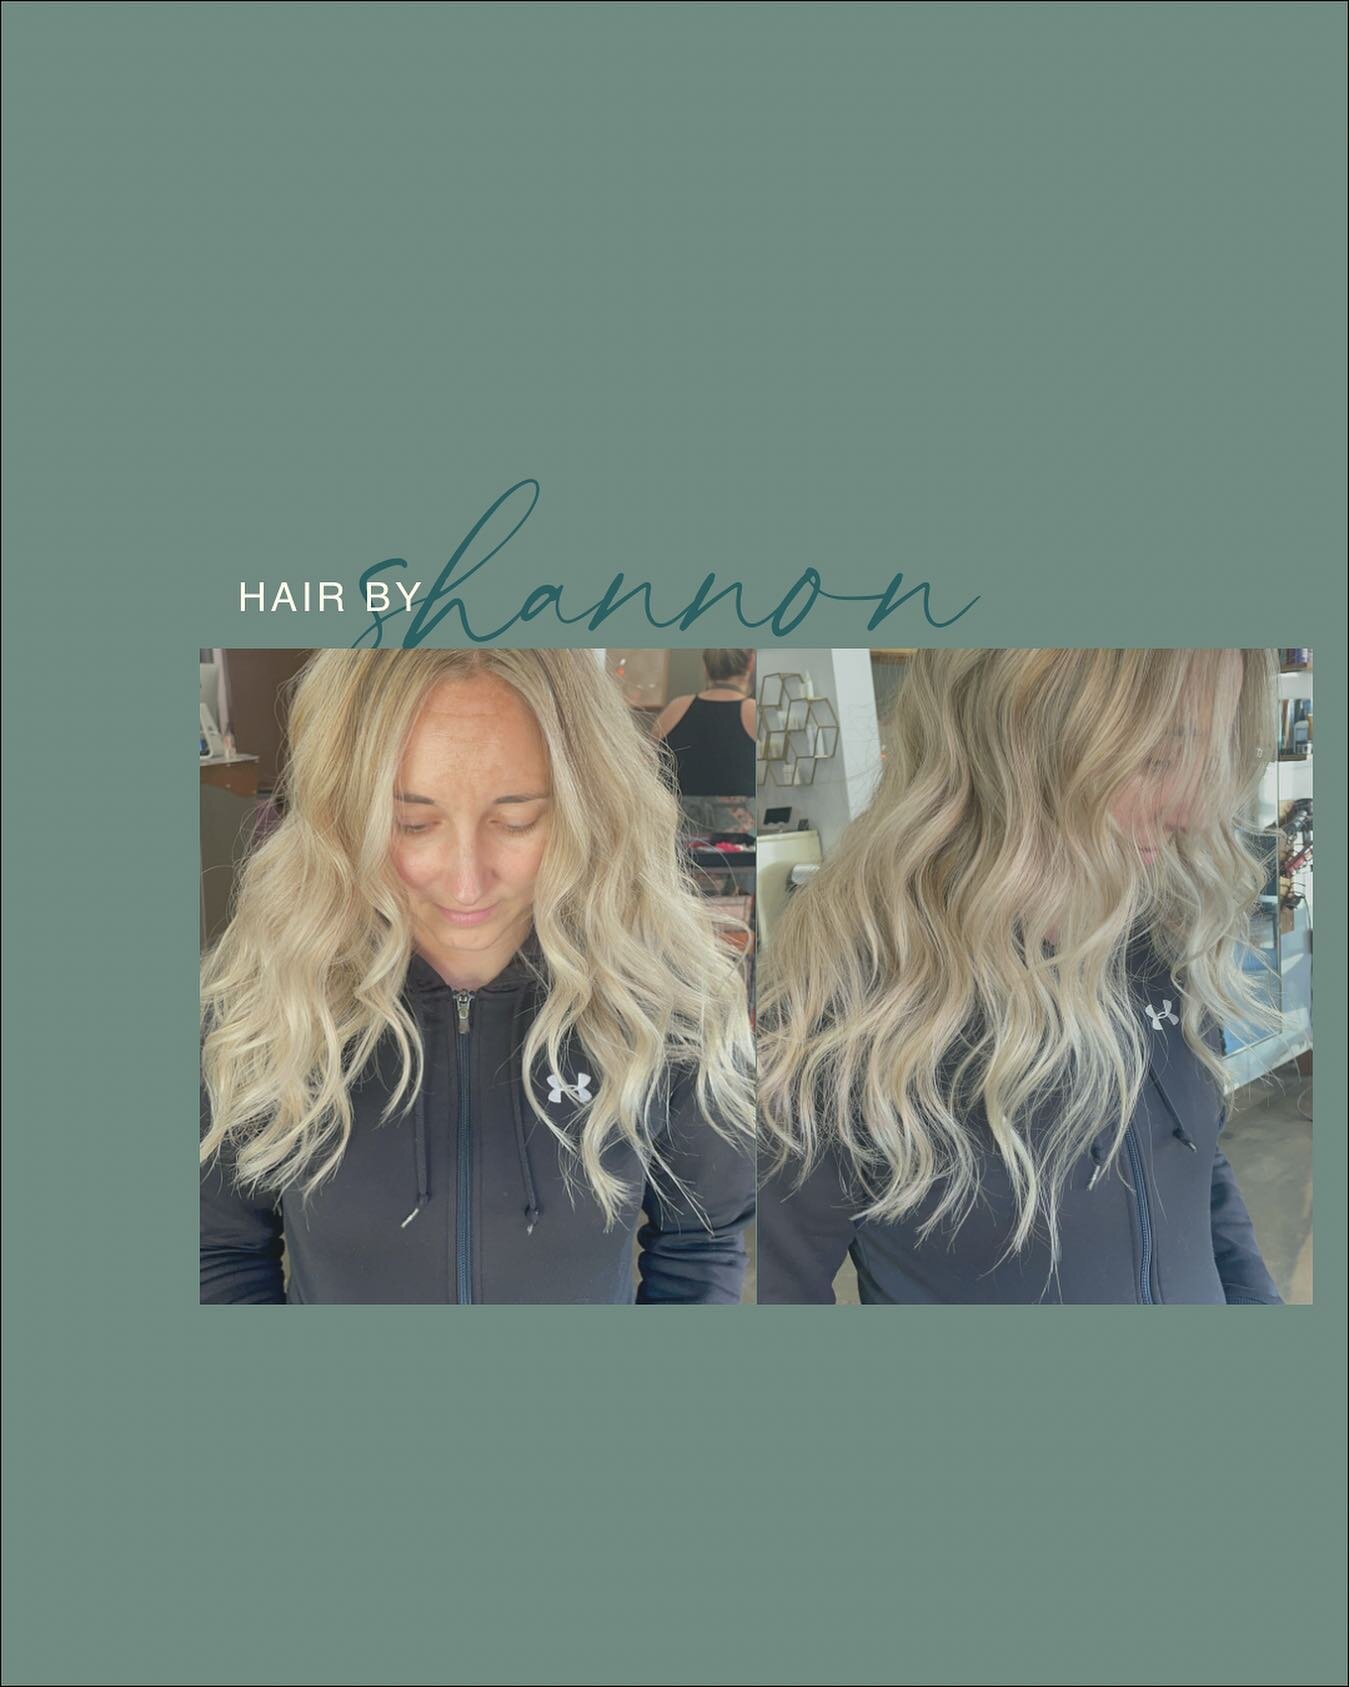 When it comes to blonding, your natural haircolor matters as well as your hairs history and how much maintenance you&rsquo;re up for. 

We go over these questions and more before starting any color service. If you have been wanting to a book a hair a